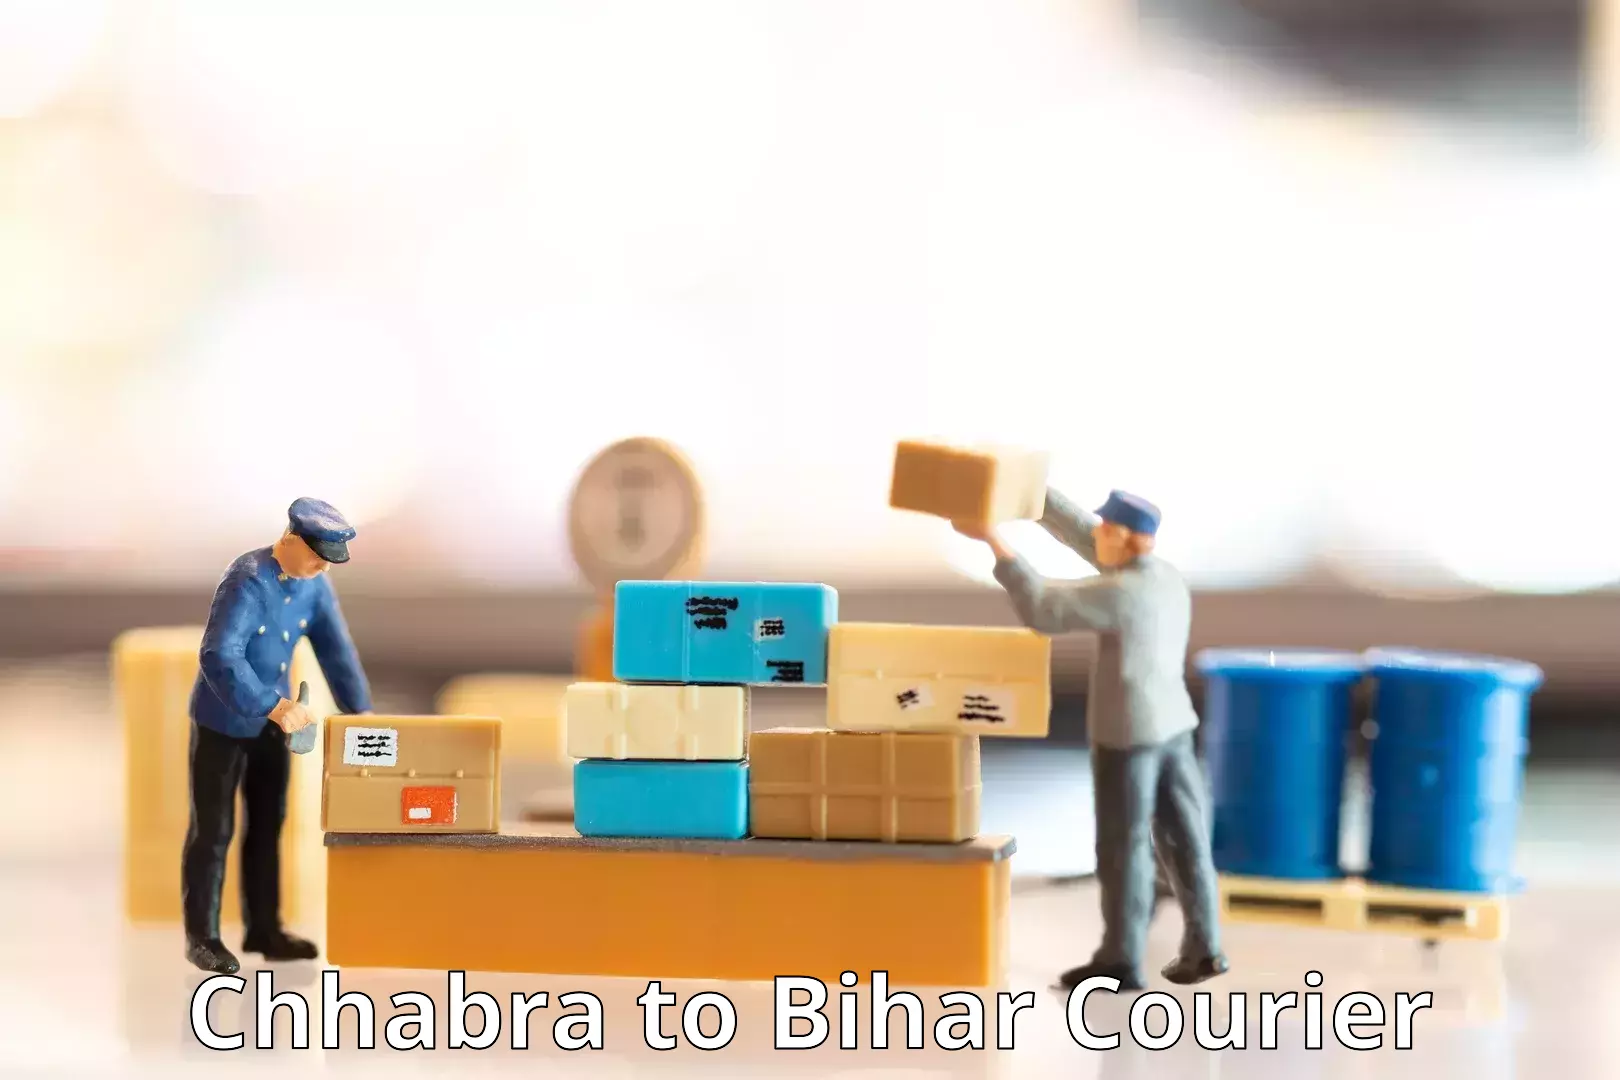 Multi-national courier services Chhabra to Bihta